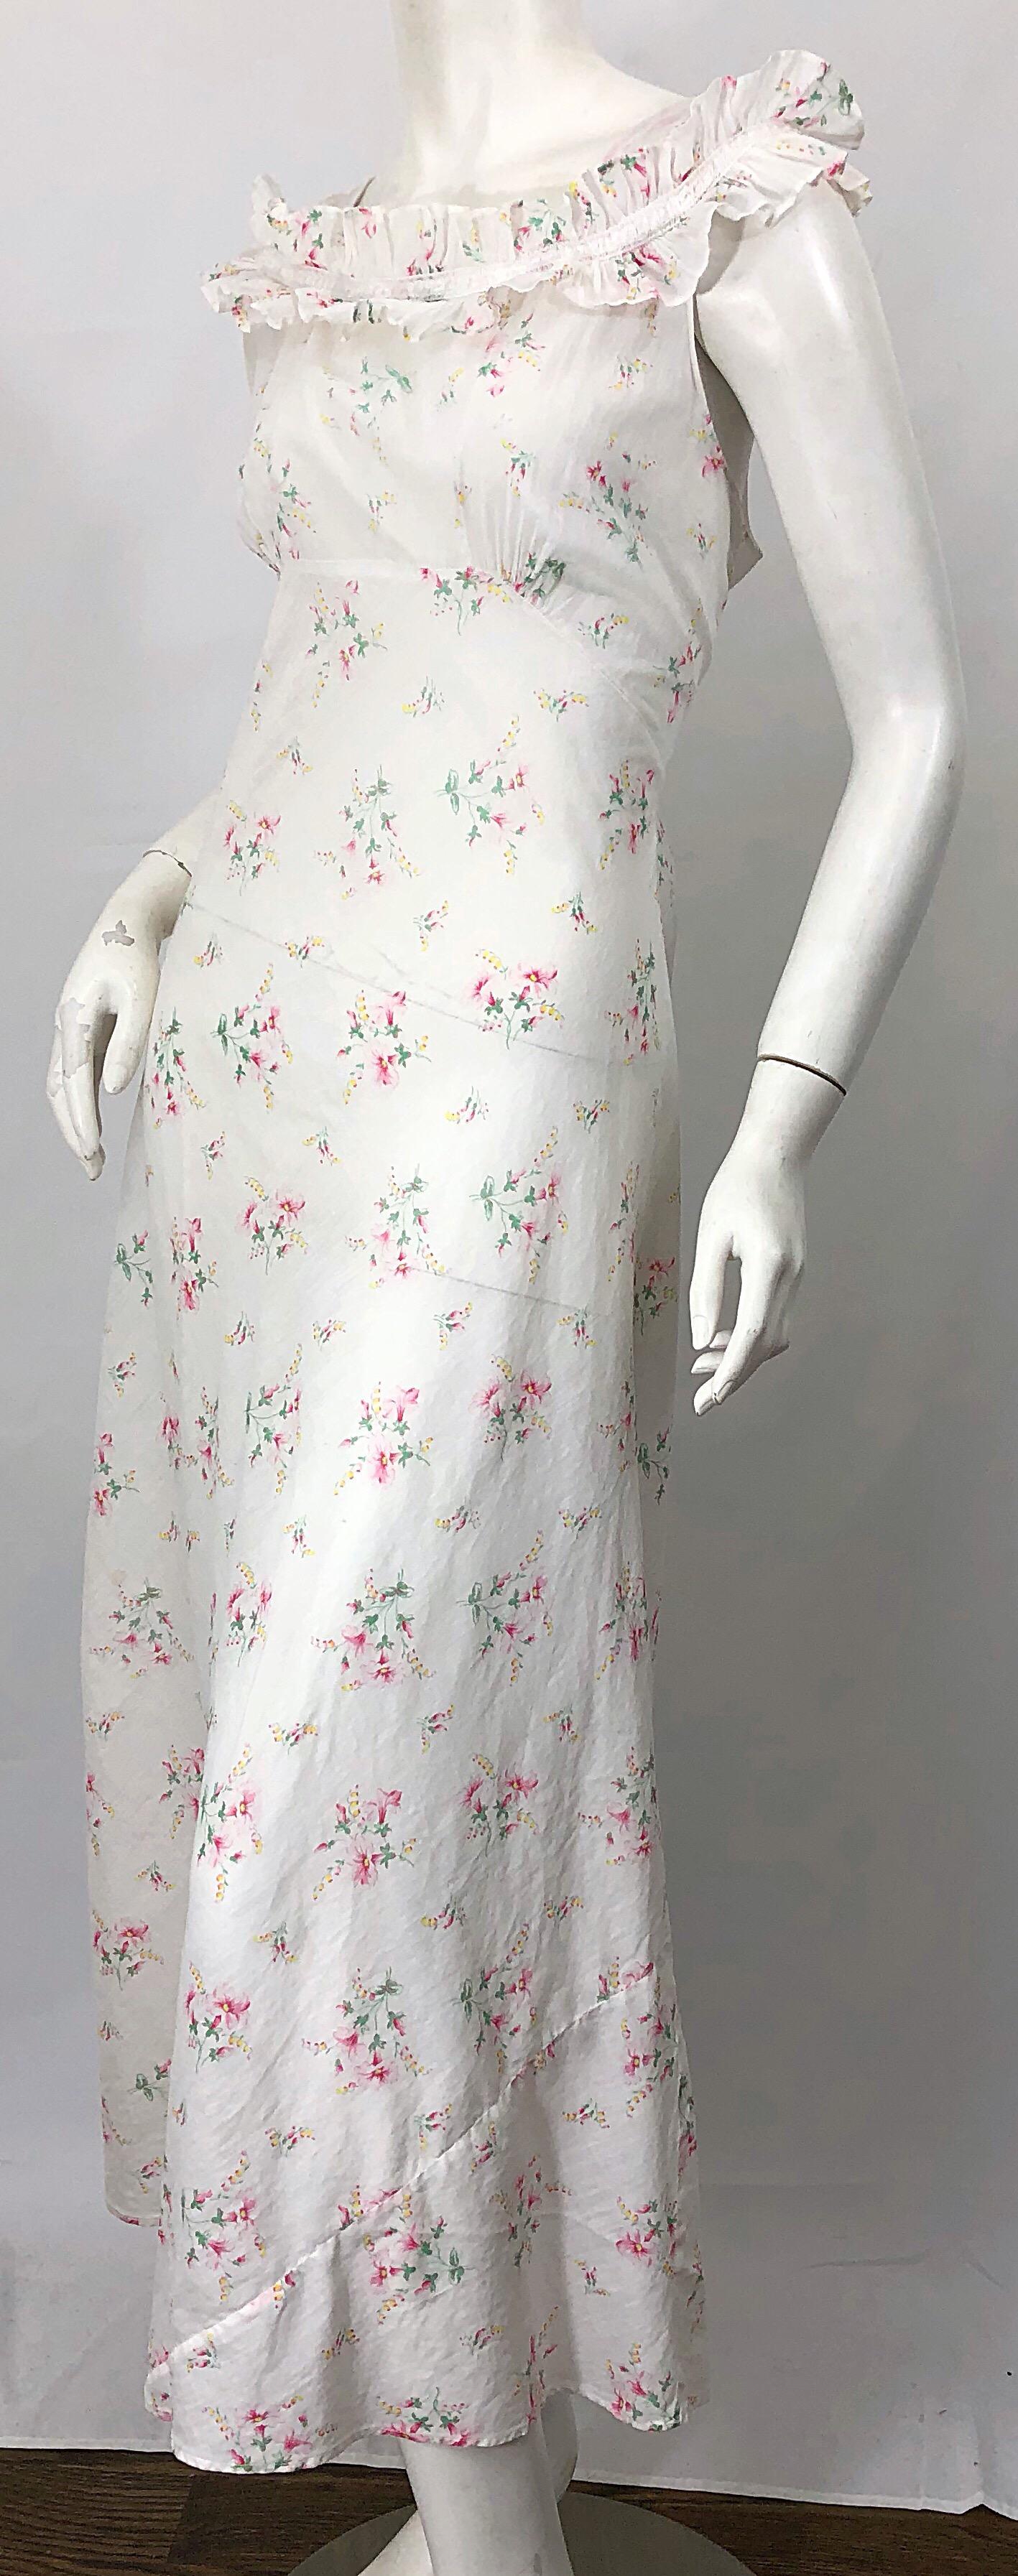 1930s White Flower Print Ruffle Neck Bias Cut Cotton Voile Vintage Maxi Dress In Excellent Condition For Sale In San Diego, CA